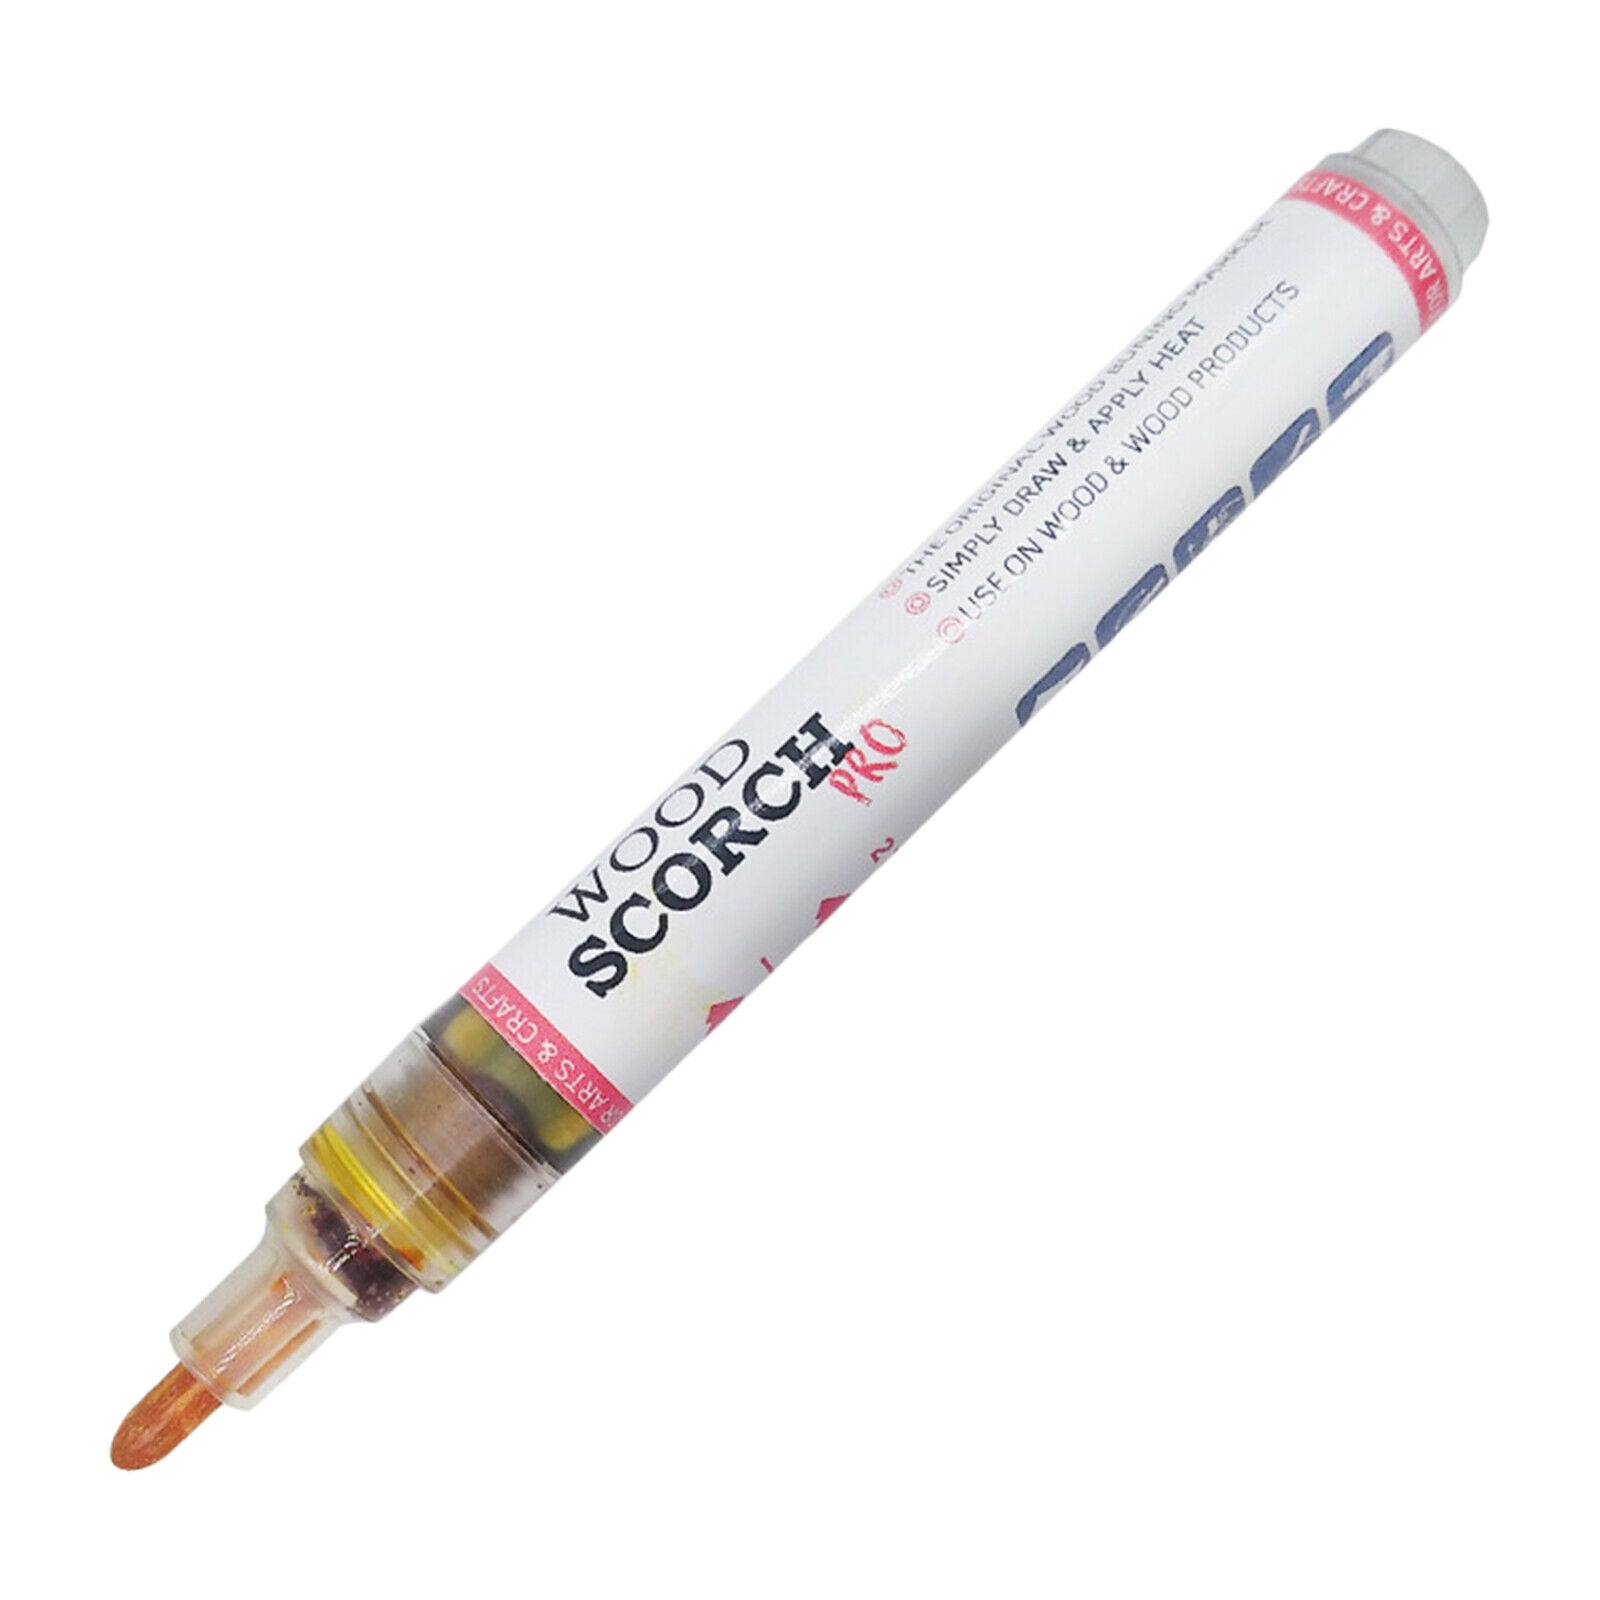 Scorch Marker Chemical Wood Burning Pen for DIY Project Woodworking Painting